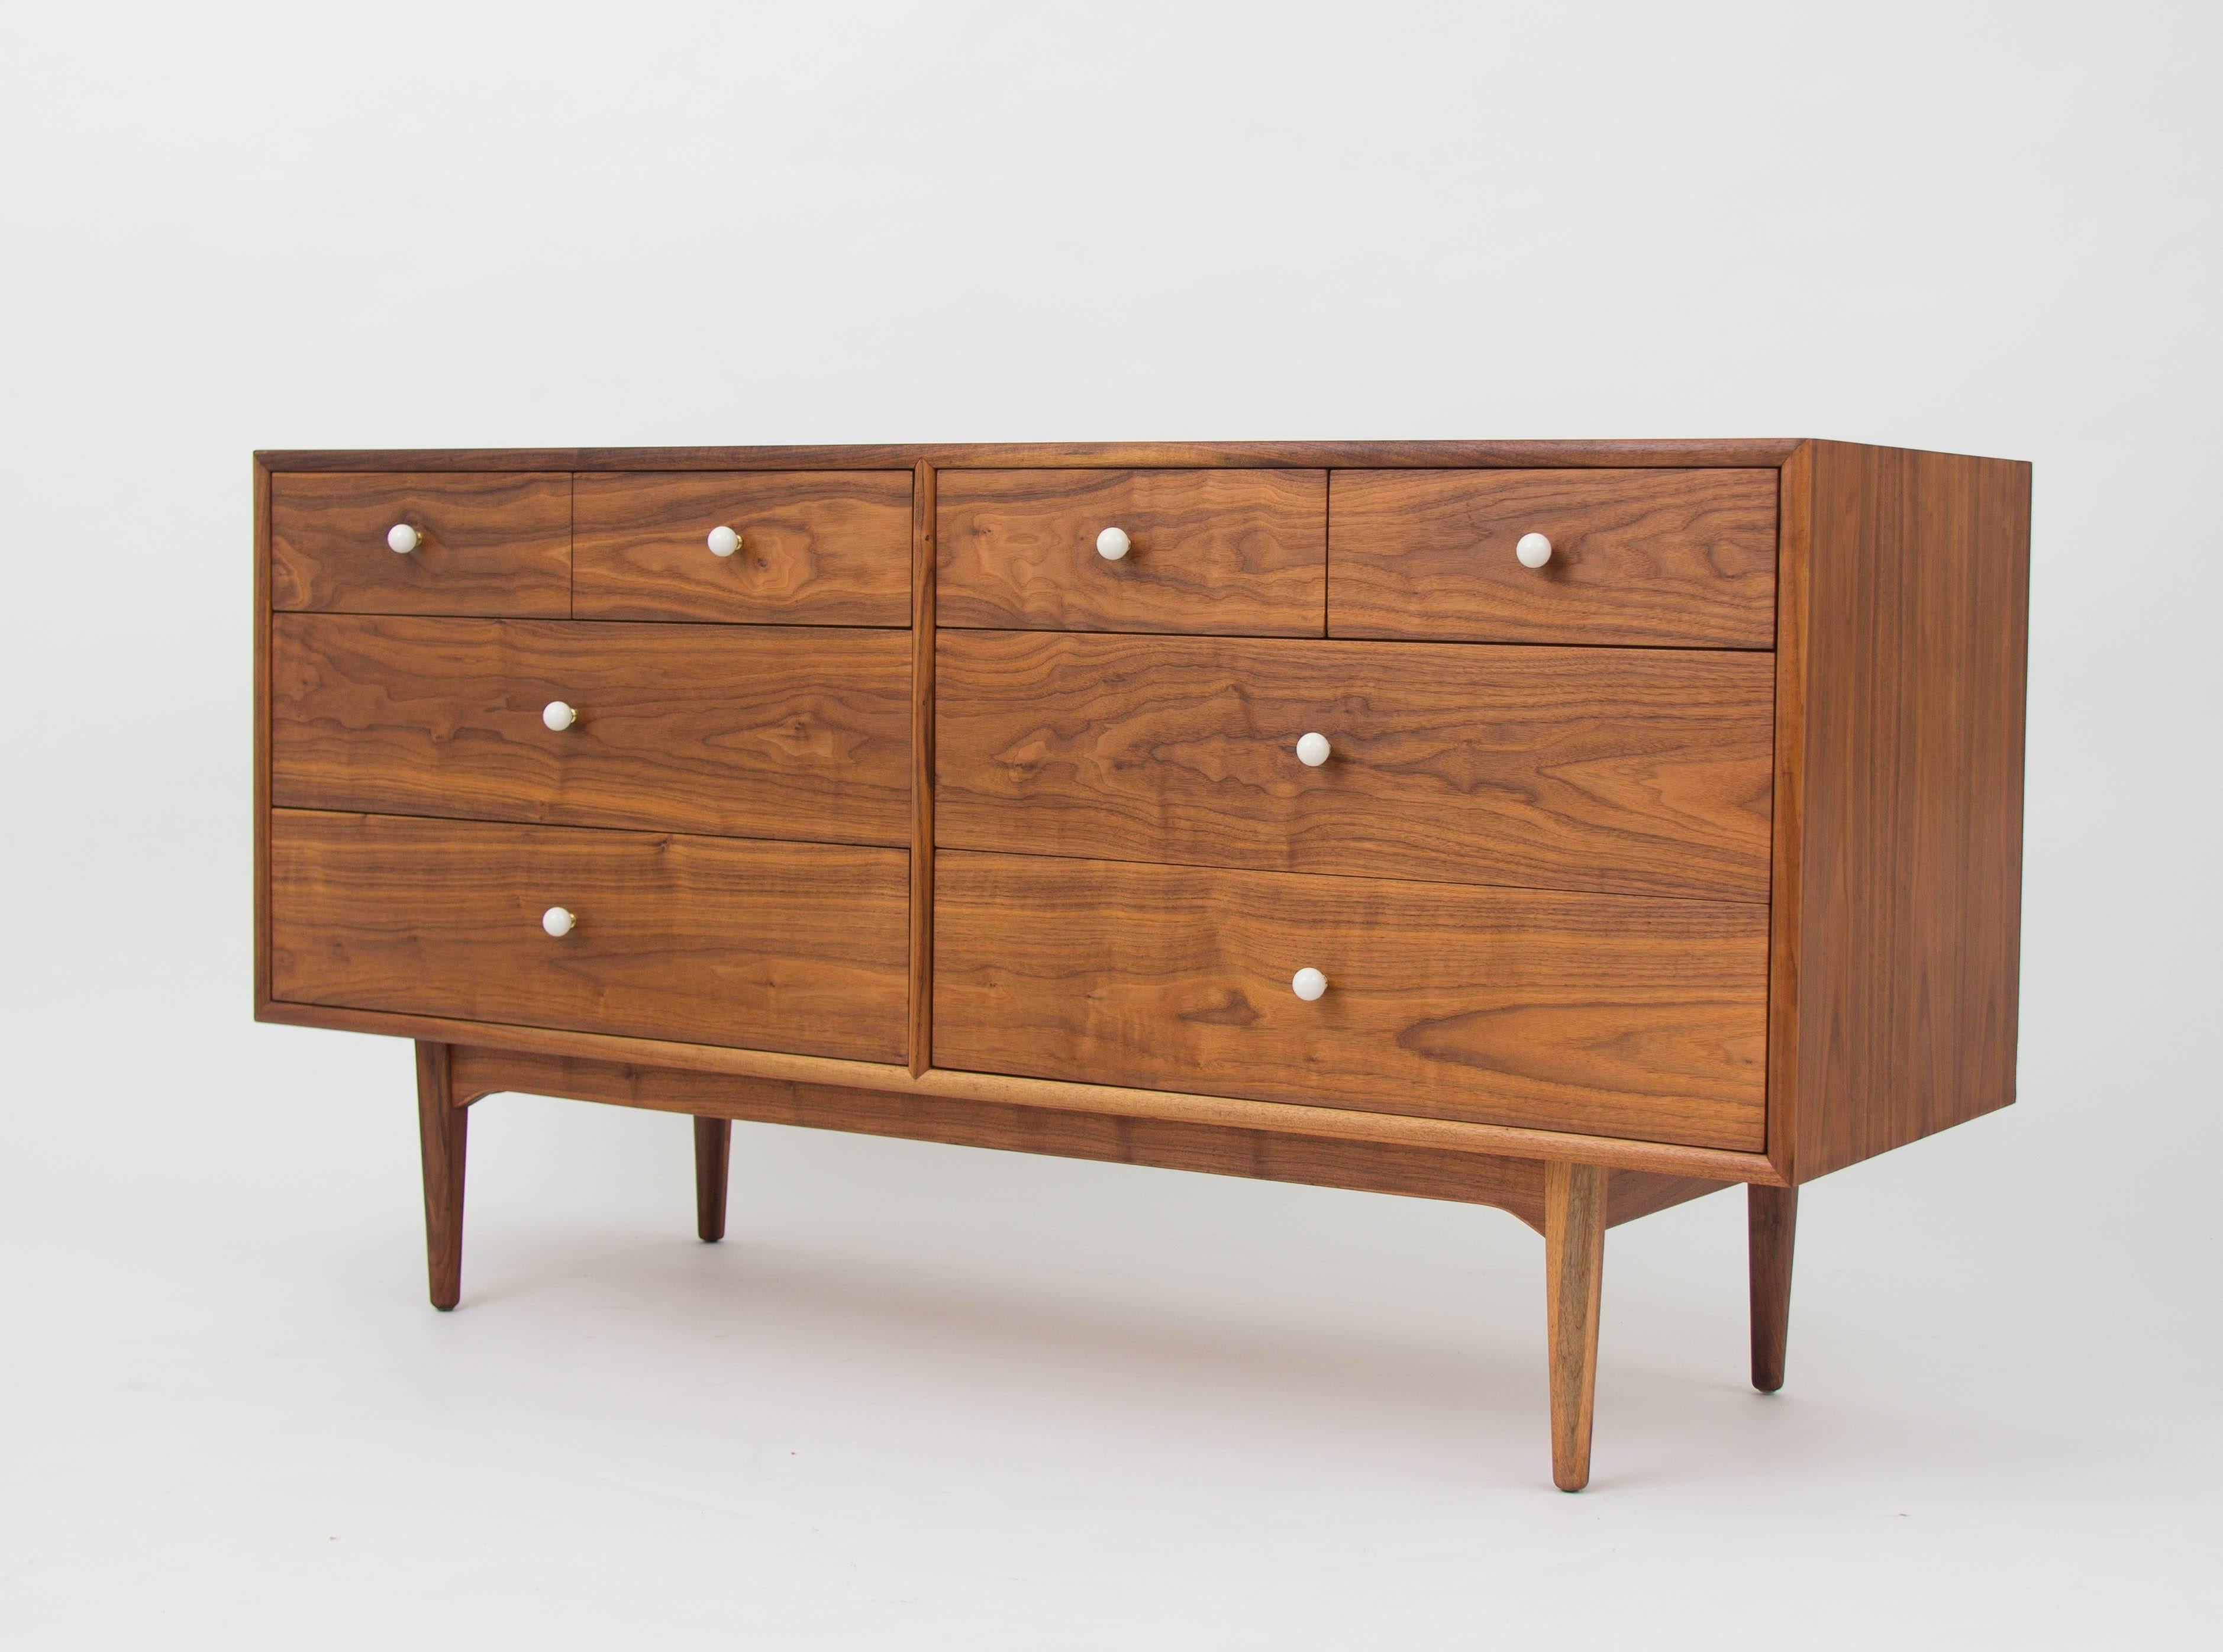 Drexel dresser
Walnut dresser from Drexel’s popular Declaration collection by Kipp Stewart and Stewart MacDougall. This example has a walnut case holding eight-drawers with original white ceramic knobs on brass spacers. Each of the two-drawer stacks